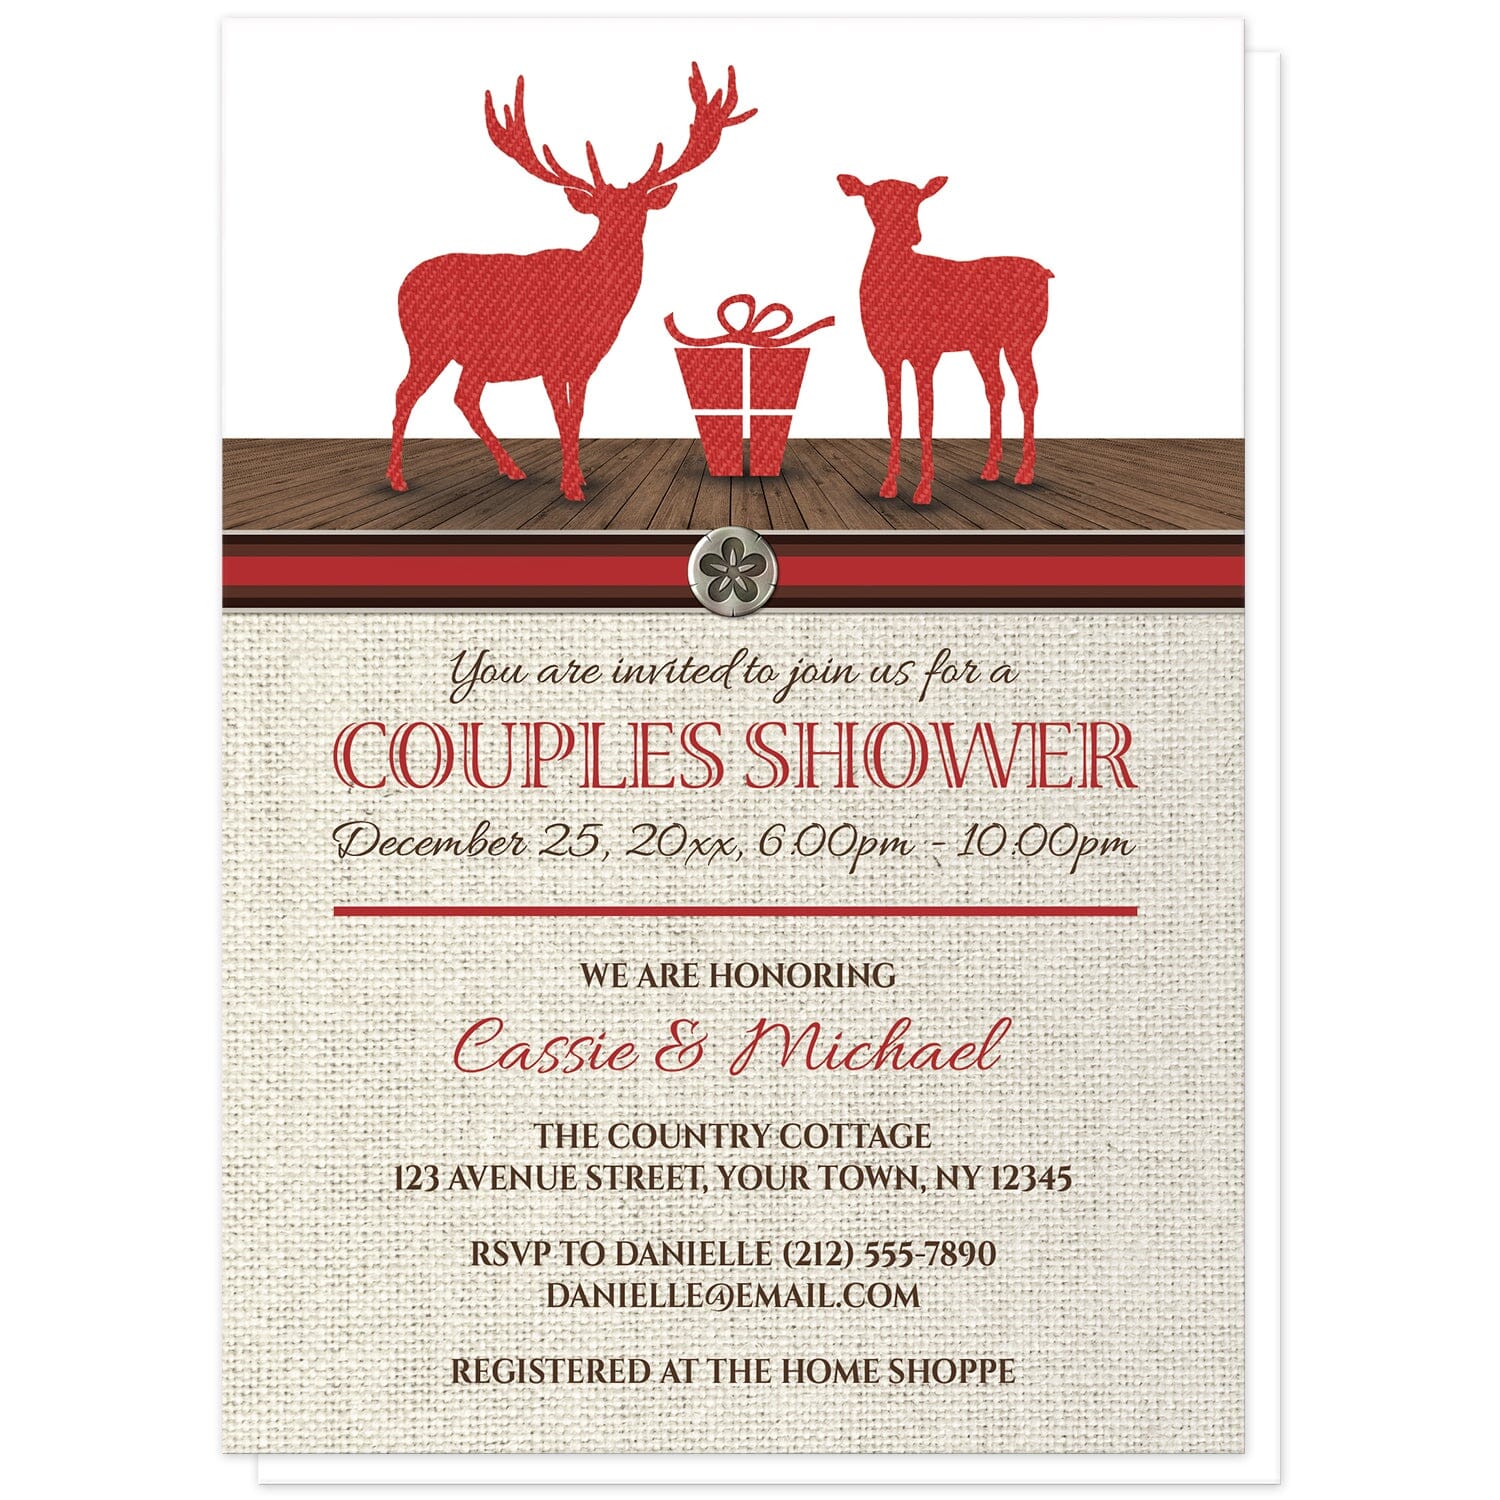 Rustic Deer Burlap Red Holiday Couples Shower Invitations at Artistically Invited. Rustic deer burlap red holiday couples shower invitations designed with two deer standing with a present in a red silhouette design with a denim pattern on a brown wood floor at the top of the invitations. Your personalized couples shower celebration details are custom printed in red and brown over a beige burlap background illustration. 